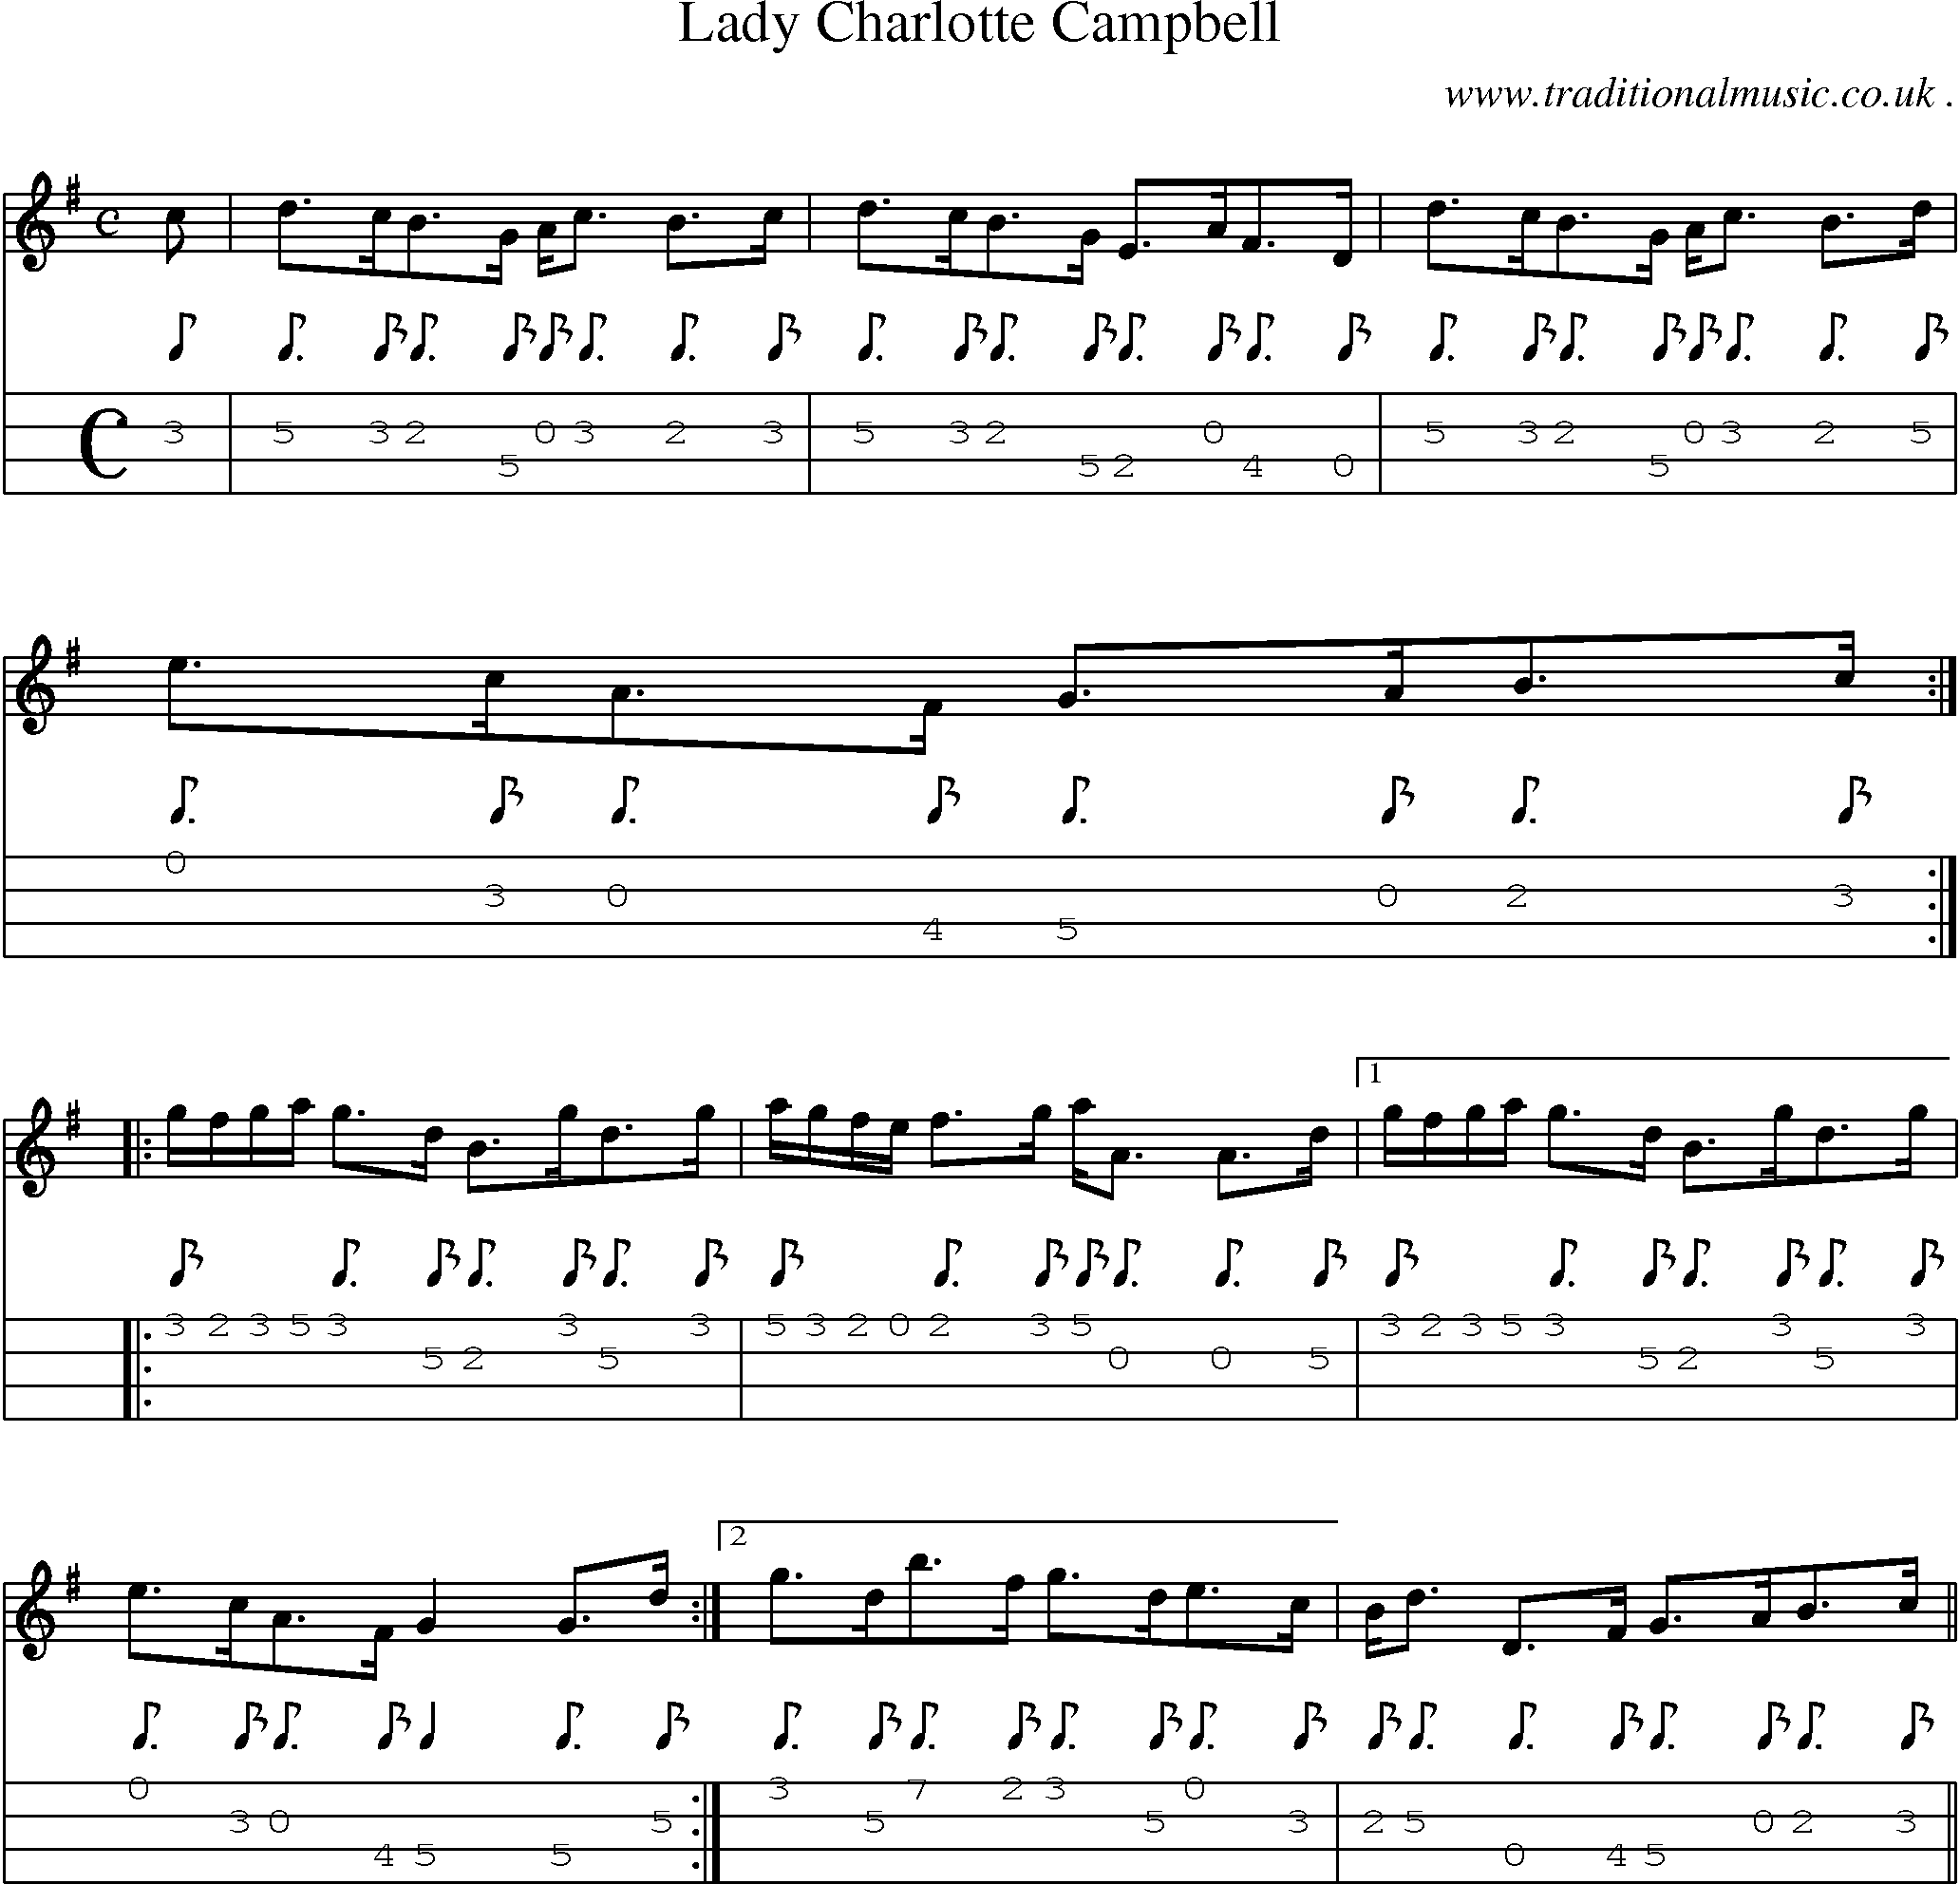 Sheet-music  score, Chords and Mandolin Tabs for Lady Charlotte Campbell 